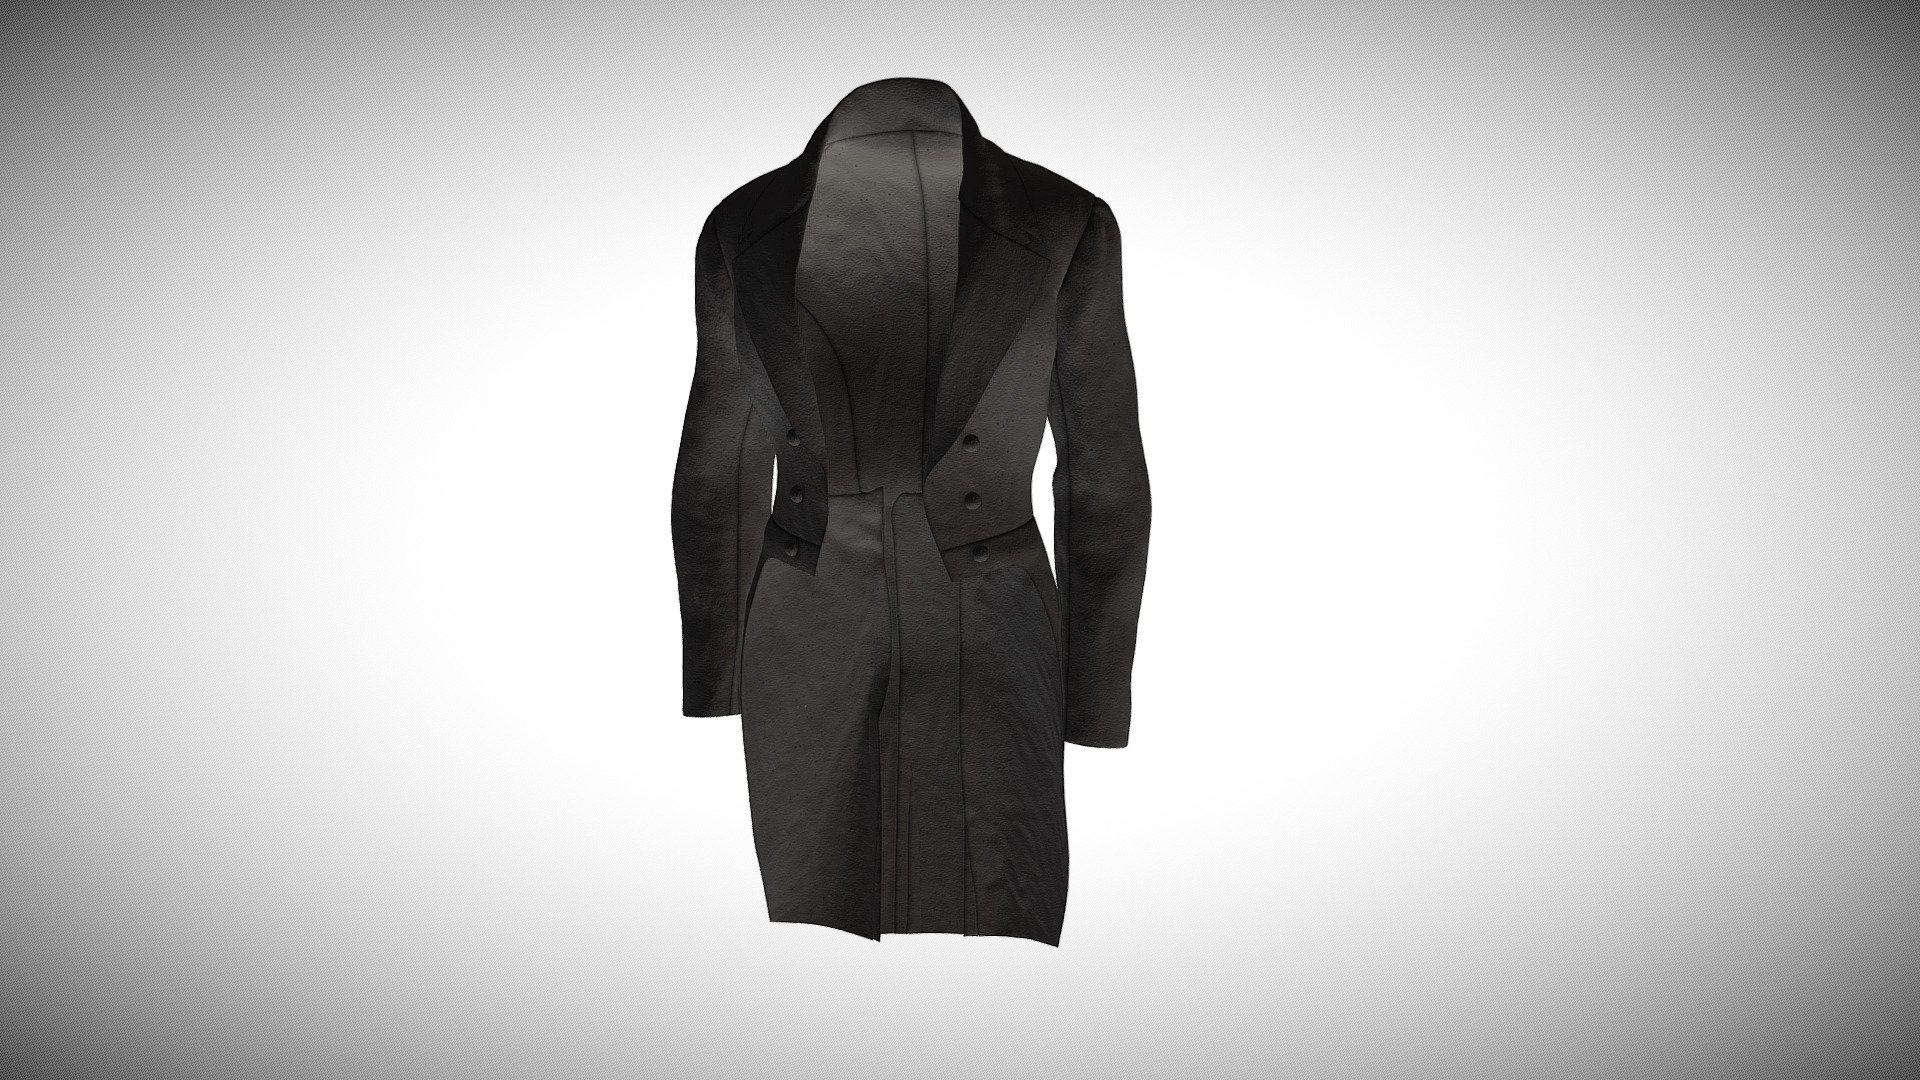 The 3D model presents a digital reconstruction of dress coat (tail coat) dating to 1895. The dress coat is presented in a historical book by S.S. Gordon (1895. The American coat, vest and trousers system. New York, J.J. Mitchell co.). For further details see https://www.academia.edu/36559737/VIRTUAL_RECONSTRUCTION_OF_HISTORICAL_MEN_S_SUIT

The authors of the 3D model are

Aleksei Moskvin https://independent.academia.edu/AlekseiMoskvin

Mariia Moskvina https://independent.academia.edu/MariiaMoskvina

(Saint Petersburg State University of Industrial Technologies and Design)

DOI http://dx.doi.org/10.13140/RG.2.2.36765.79841

The authors thank Prof. Victor Kuzmichev from Ivanovo State Polytechnic University for his important contribution to this reconstruction 3d model